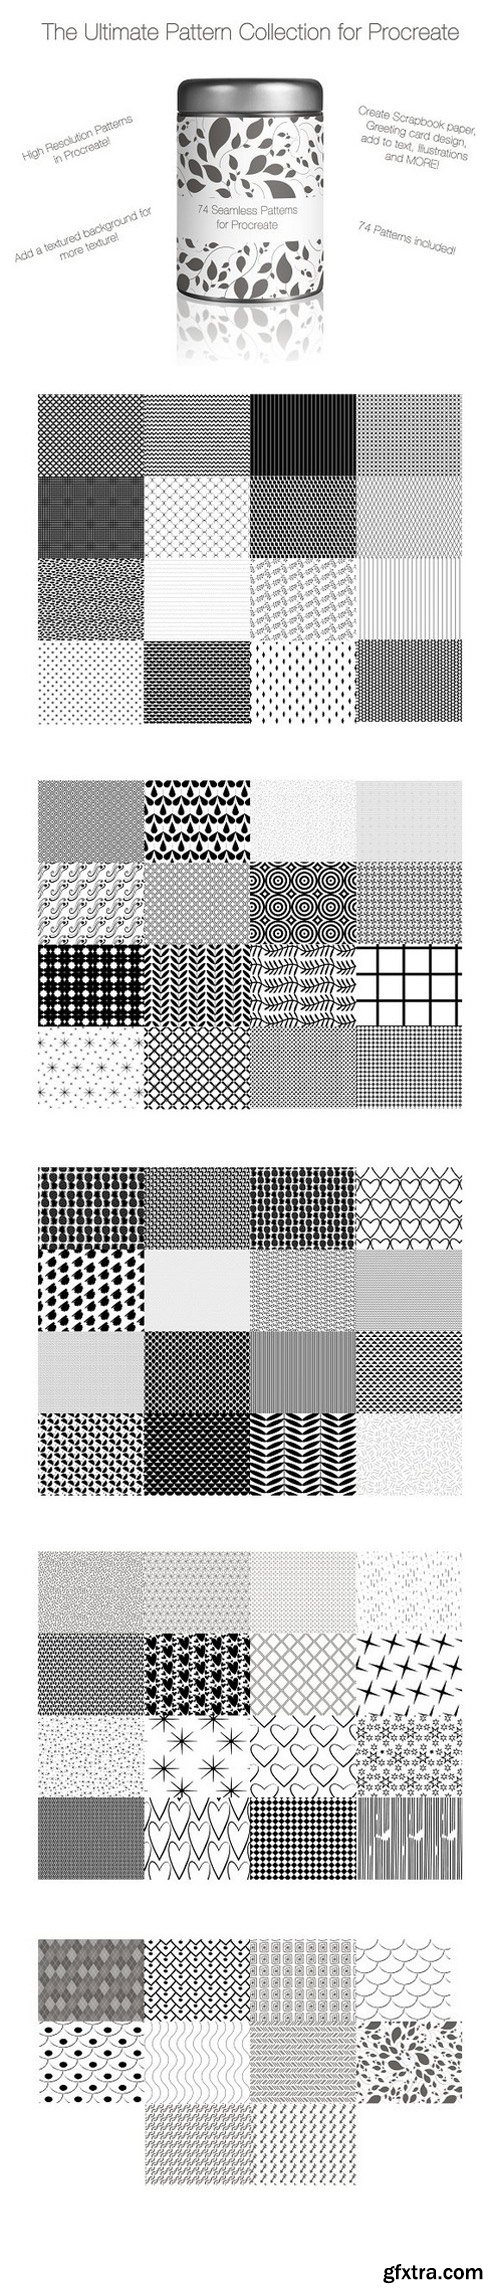 CM - 74 Seamless Patterns for Procreate 1354811